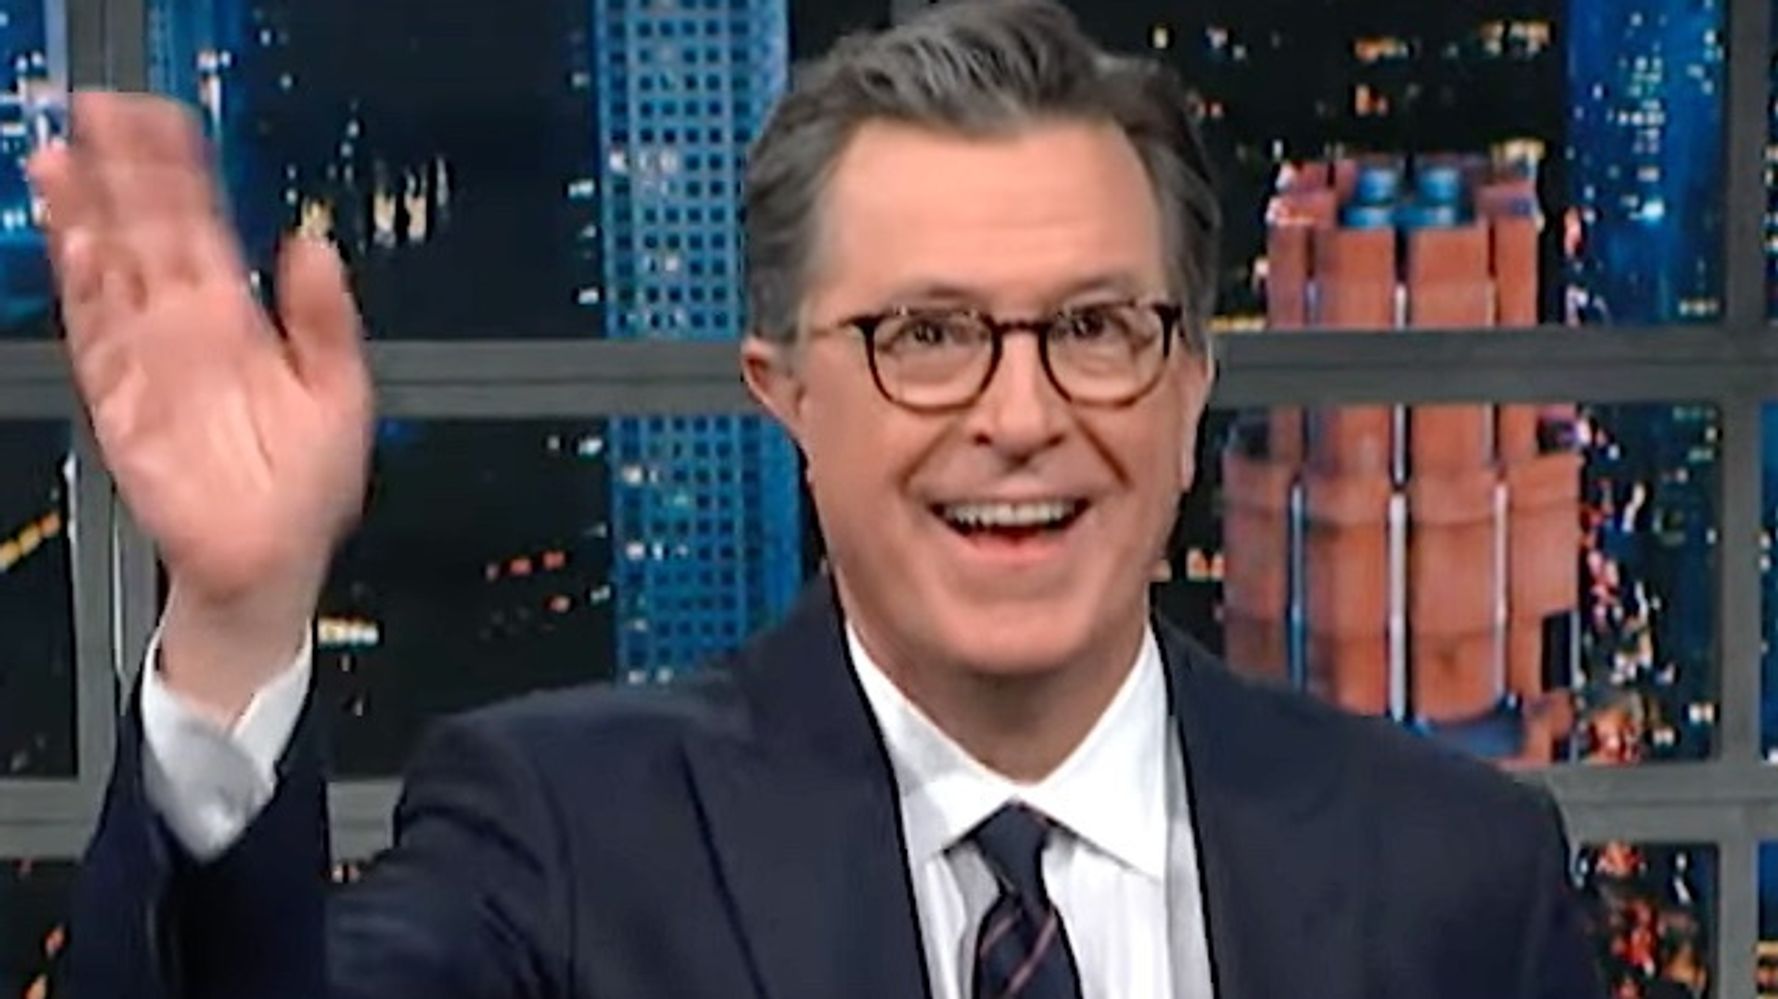 Stephen Colbert Trolls His Own Corporate Bosses With A Biting Reality Check